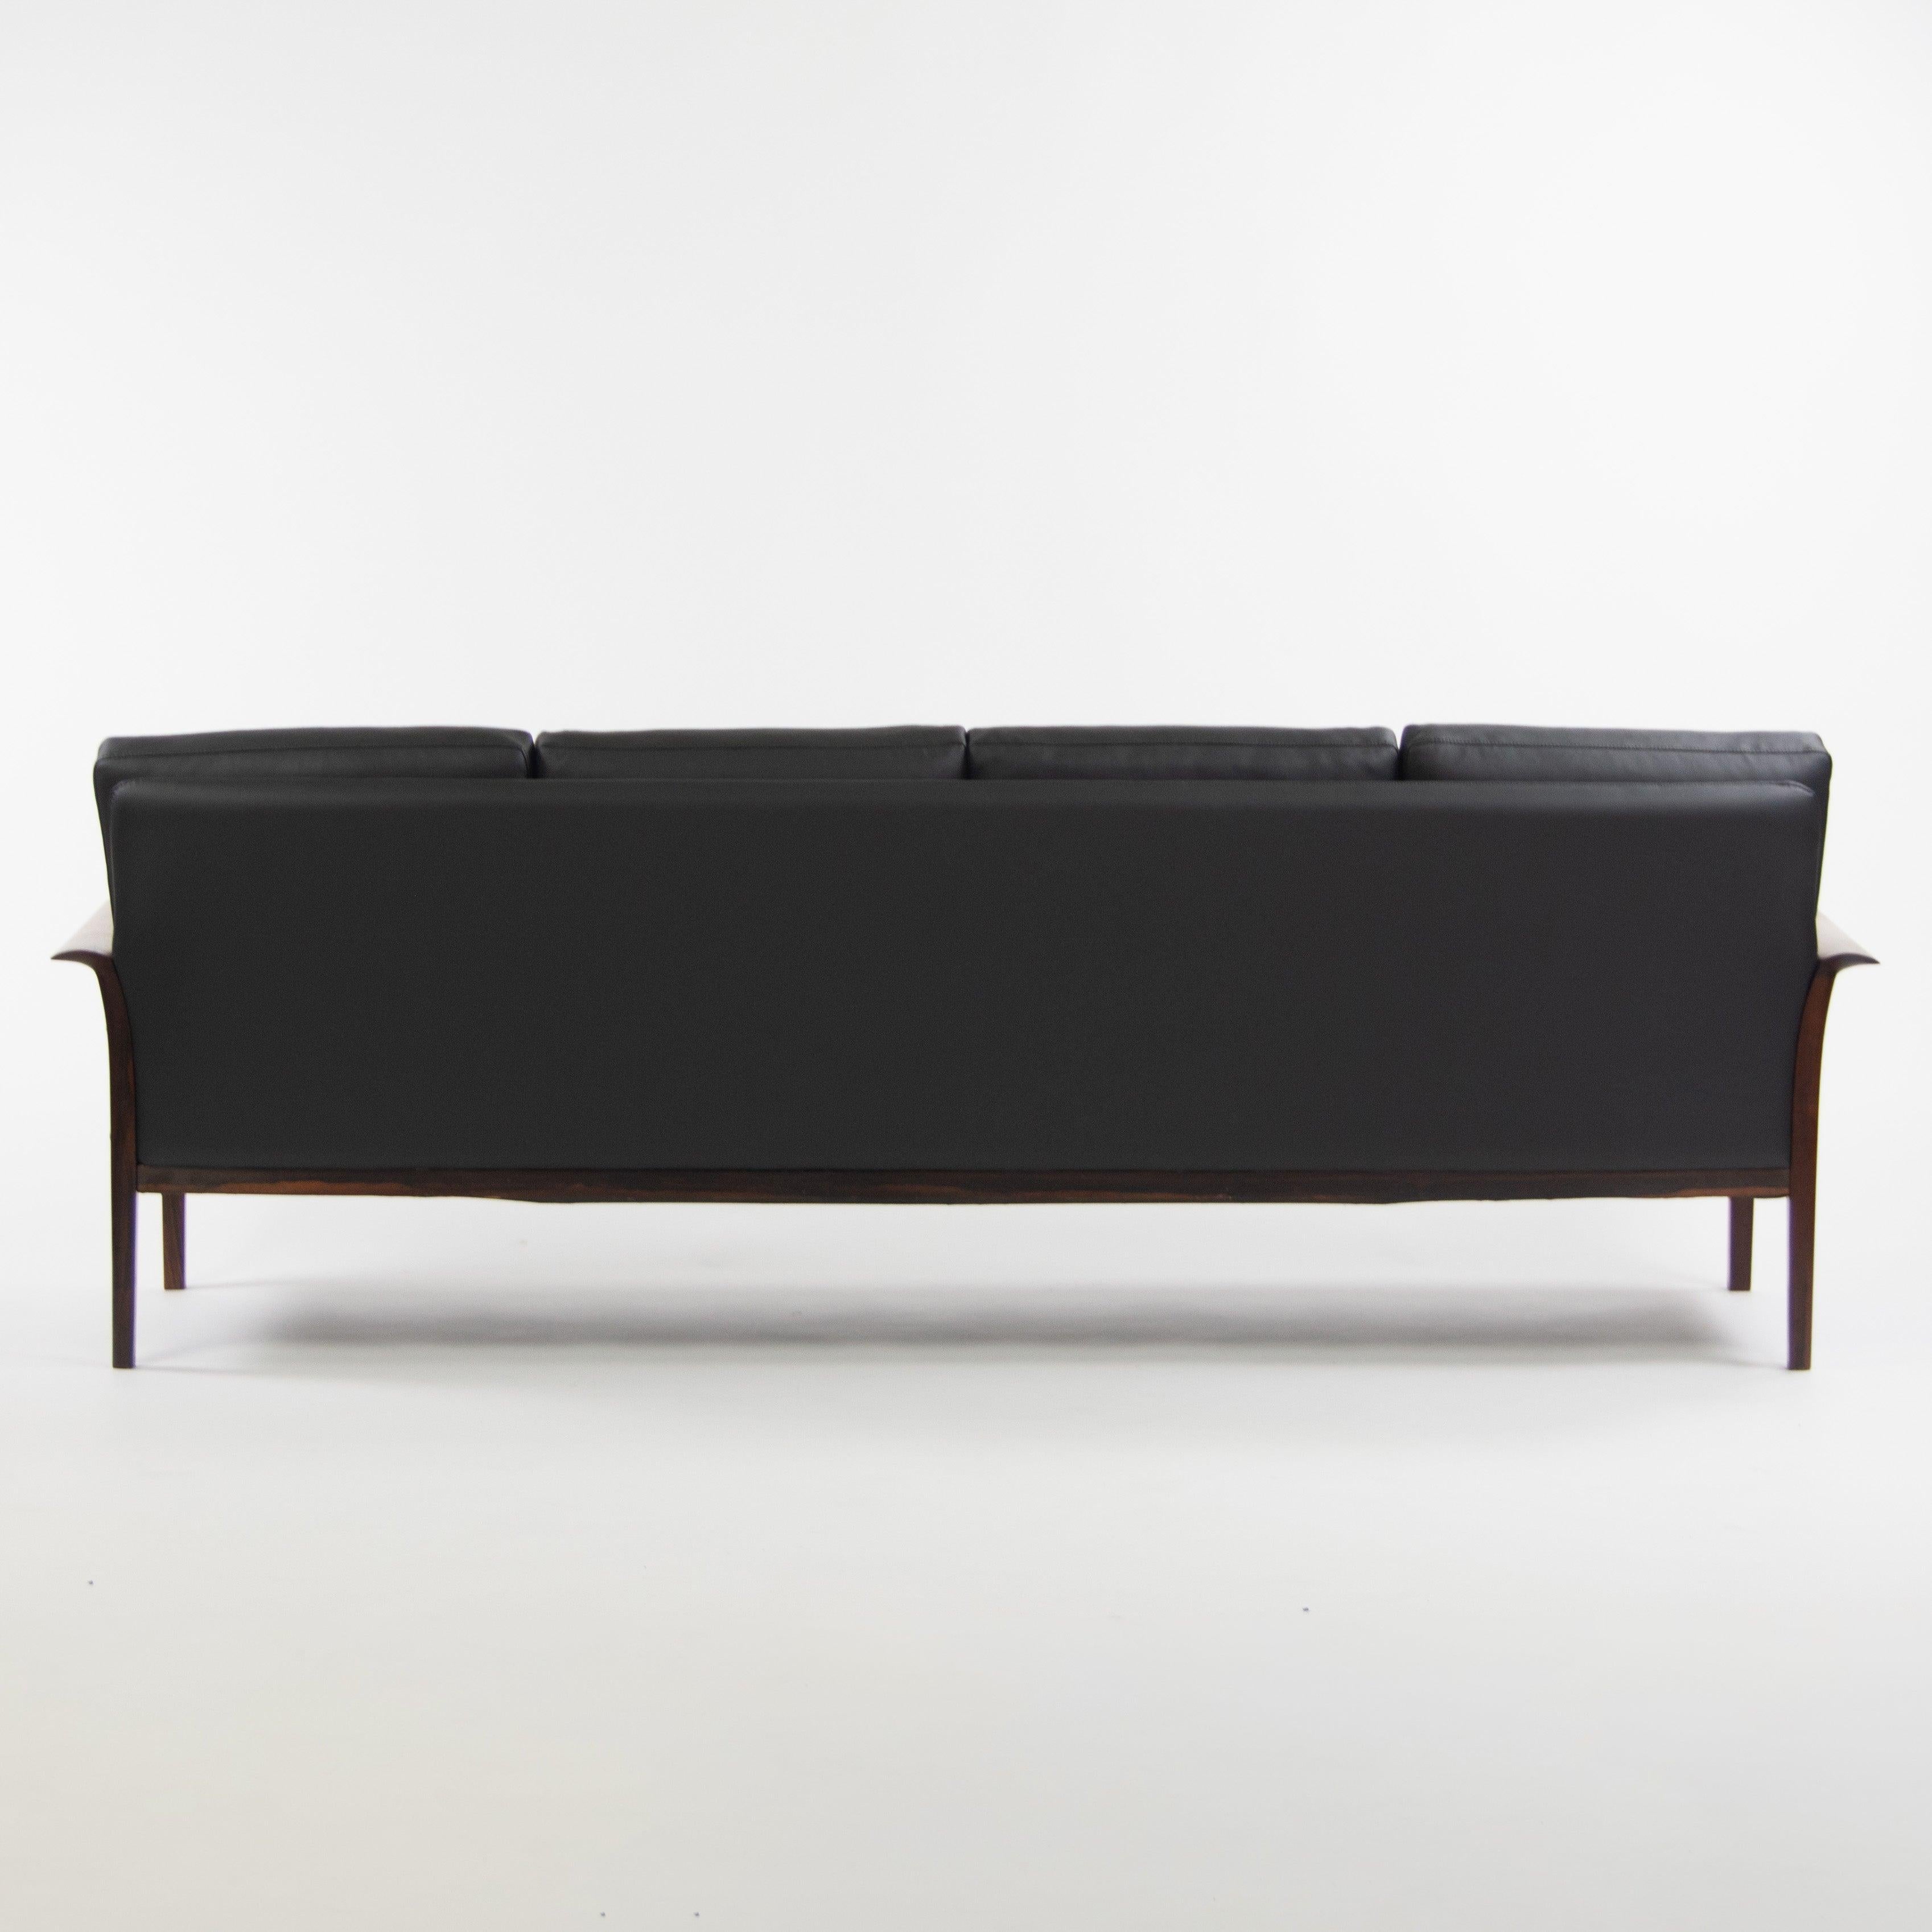 Mid-20th Century 1960's Knut Saeter Rosewood Sofa for Vatne Mobler Norway New Black Upholstery For Sale